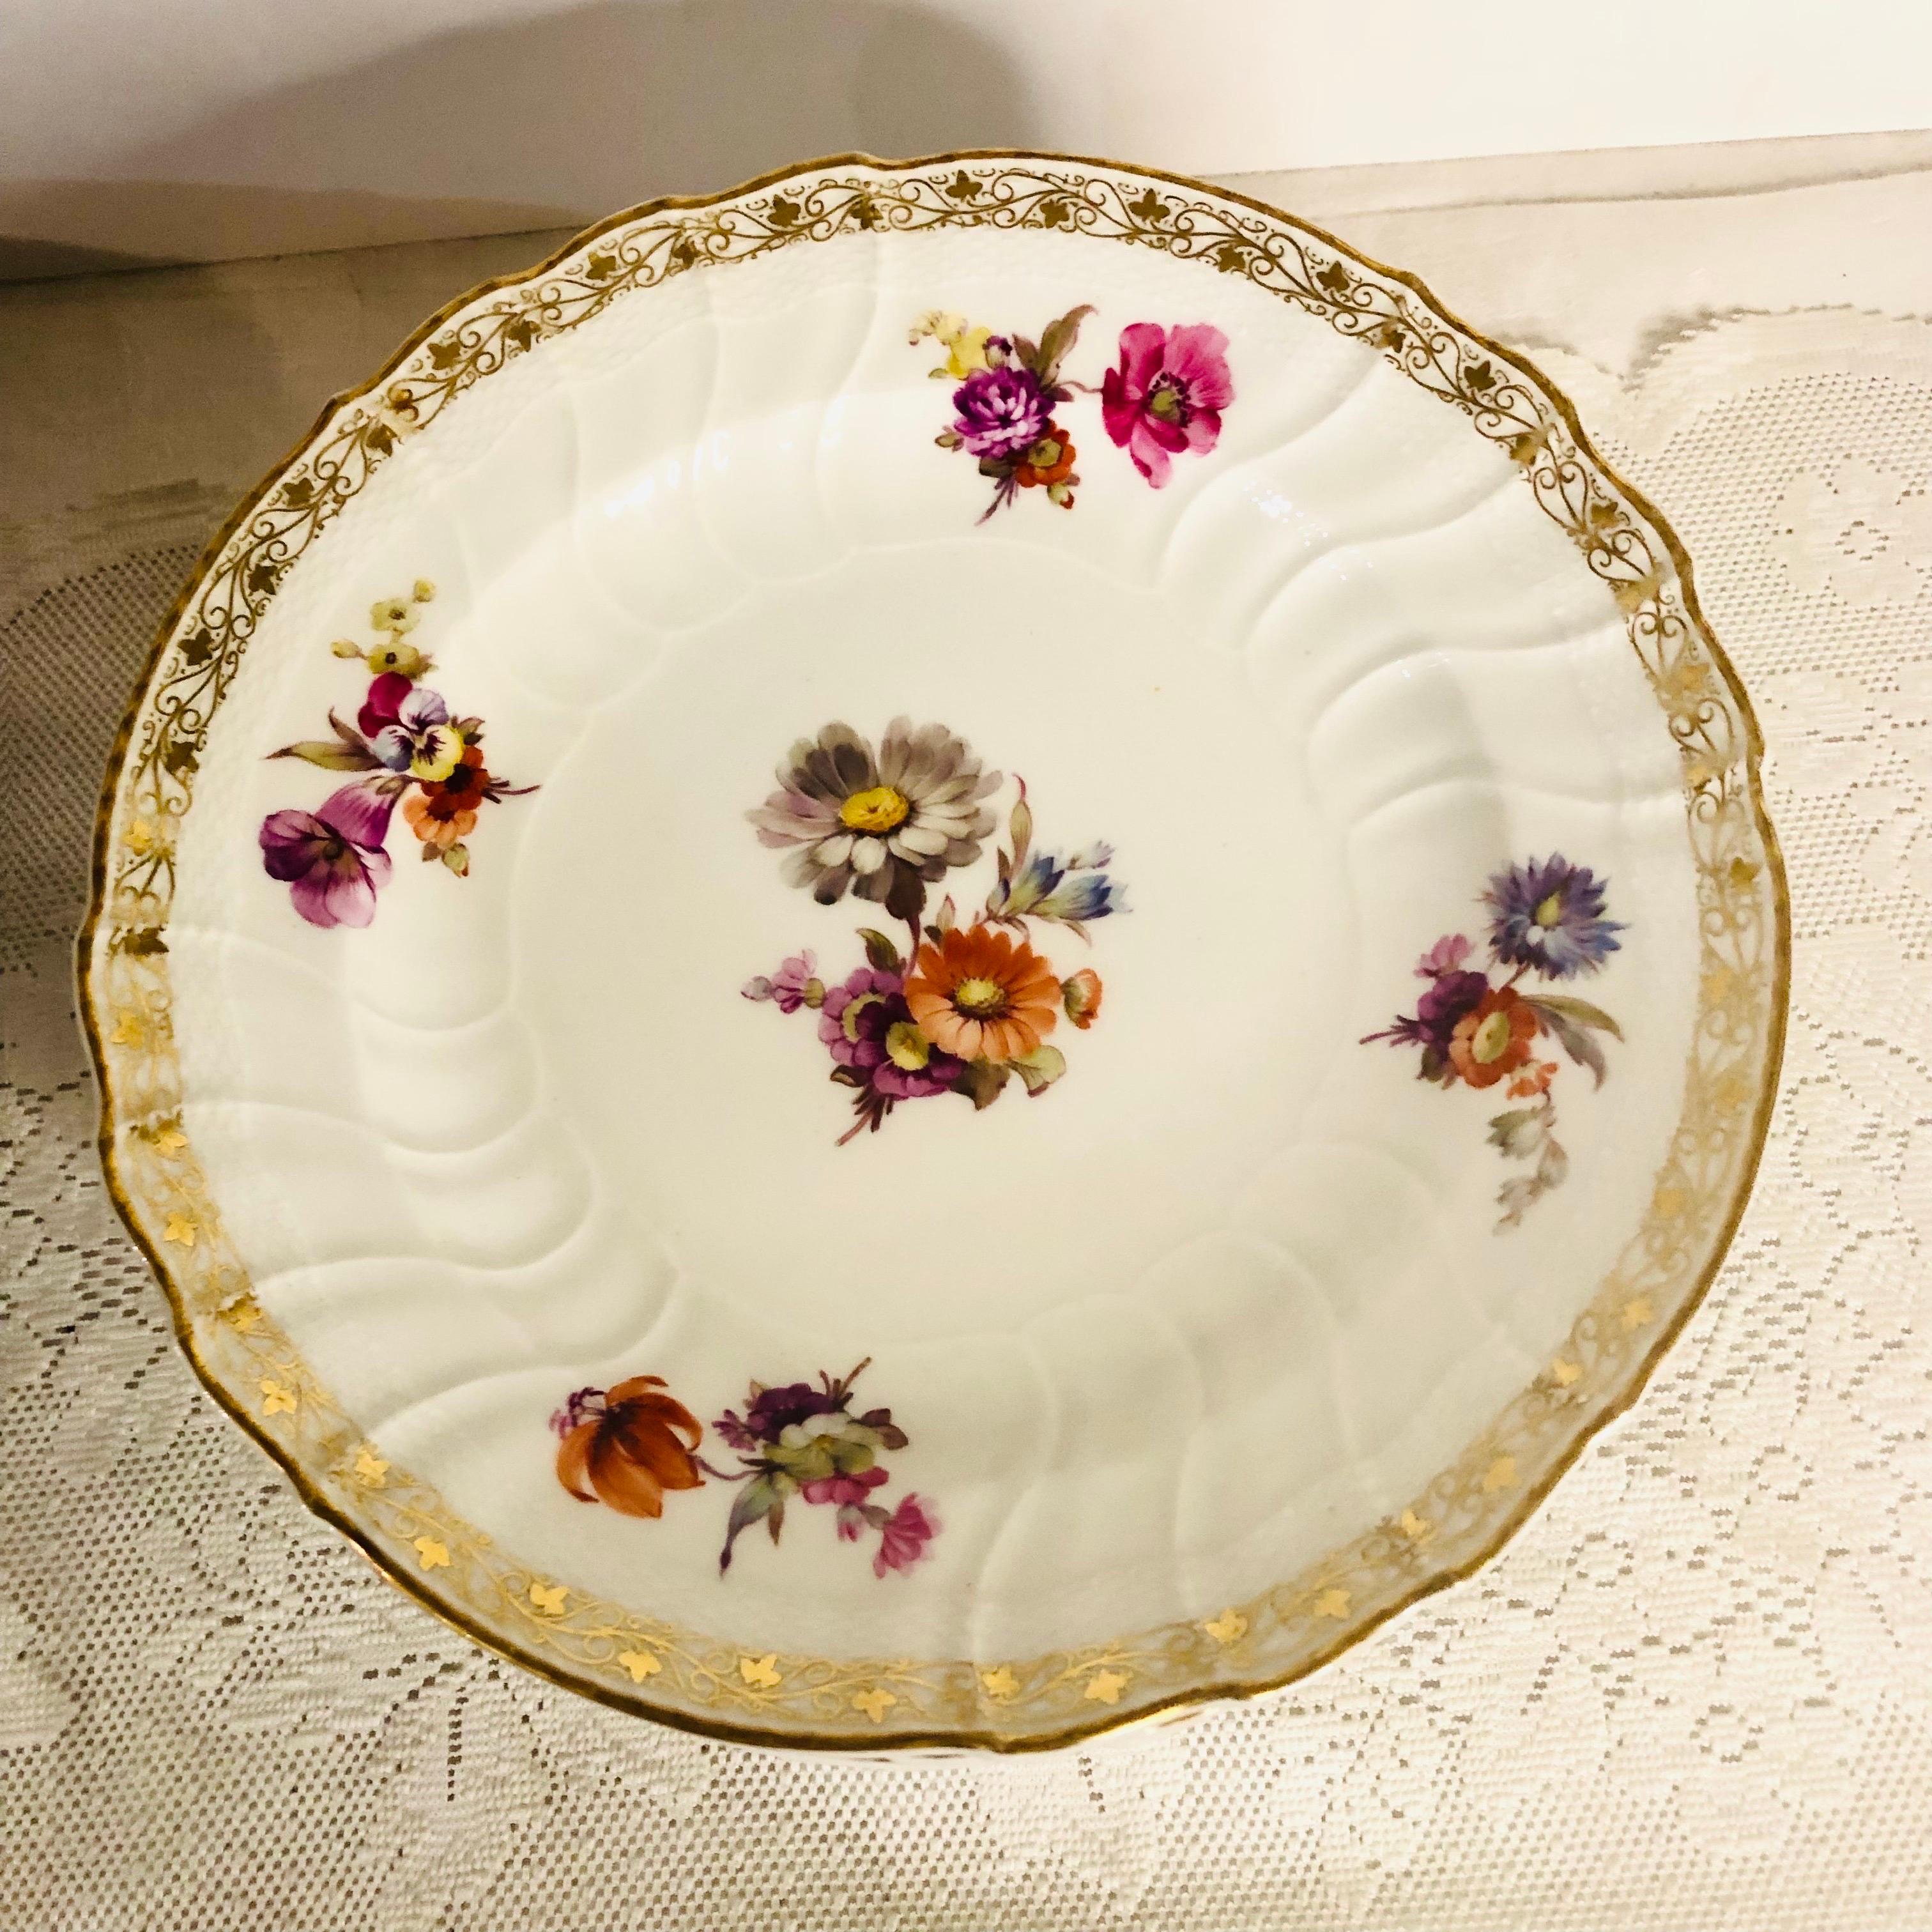 12 KPM Dinner Plates, Each Hand-Painted with a Different Central Flower Bouquet For Sale 6